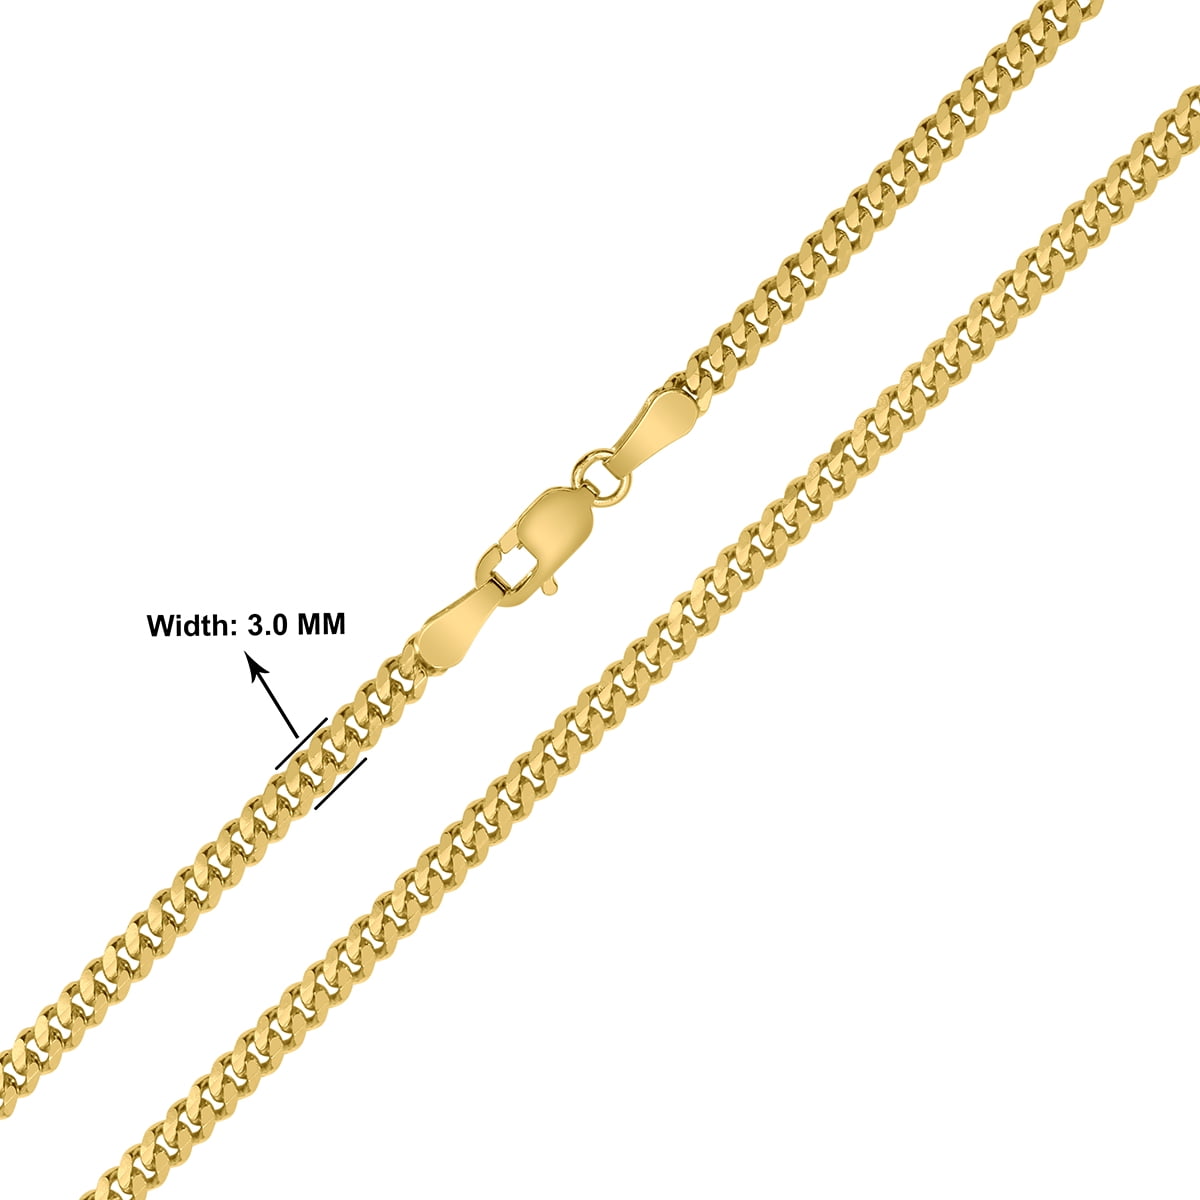 TGDJ 14k Yellow OR White Gold Solid 0.7mm Round Snake Chain Necklace with Lobster Claw Clasp